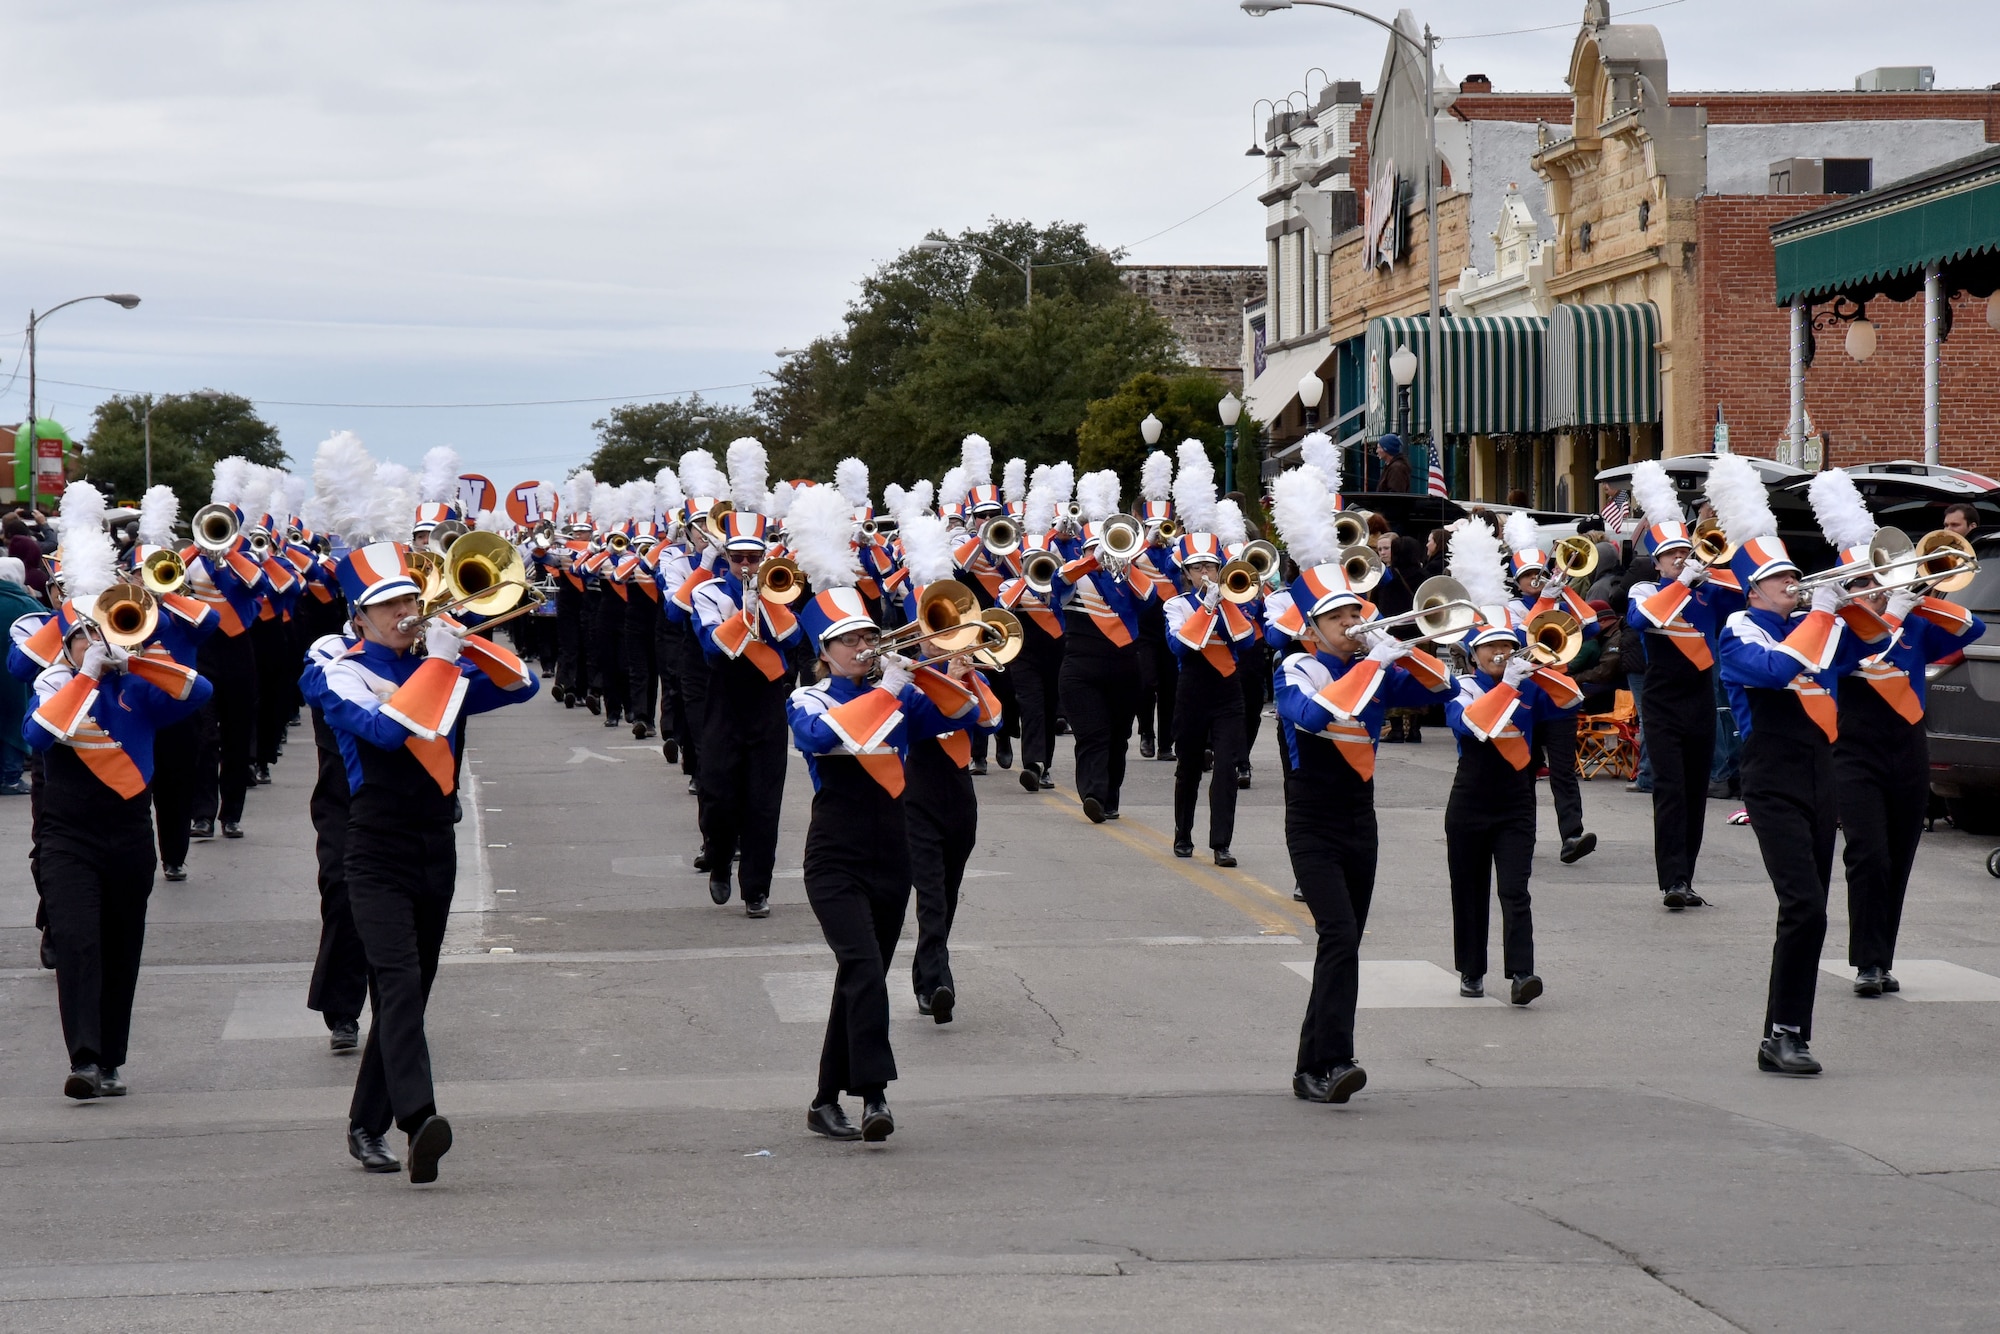 Members of the San Angelo Central High School Mighty Bobcat Band march and play their instruments in the Veterans Day Parade in San Angelo, Texas, Nov. 10, 2018. They were one of several bands that played during the parade. (U.S. Air Force photo by 2nd Lt. Matthew Stott/Released)